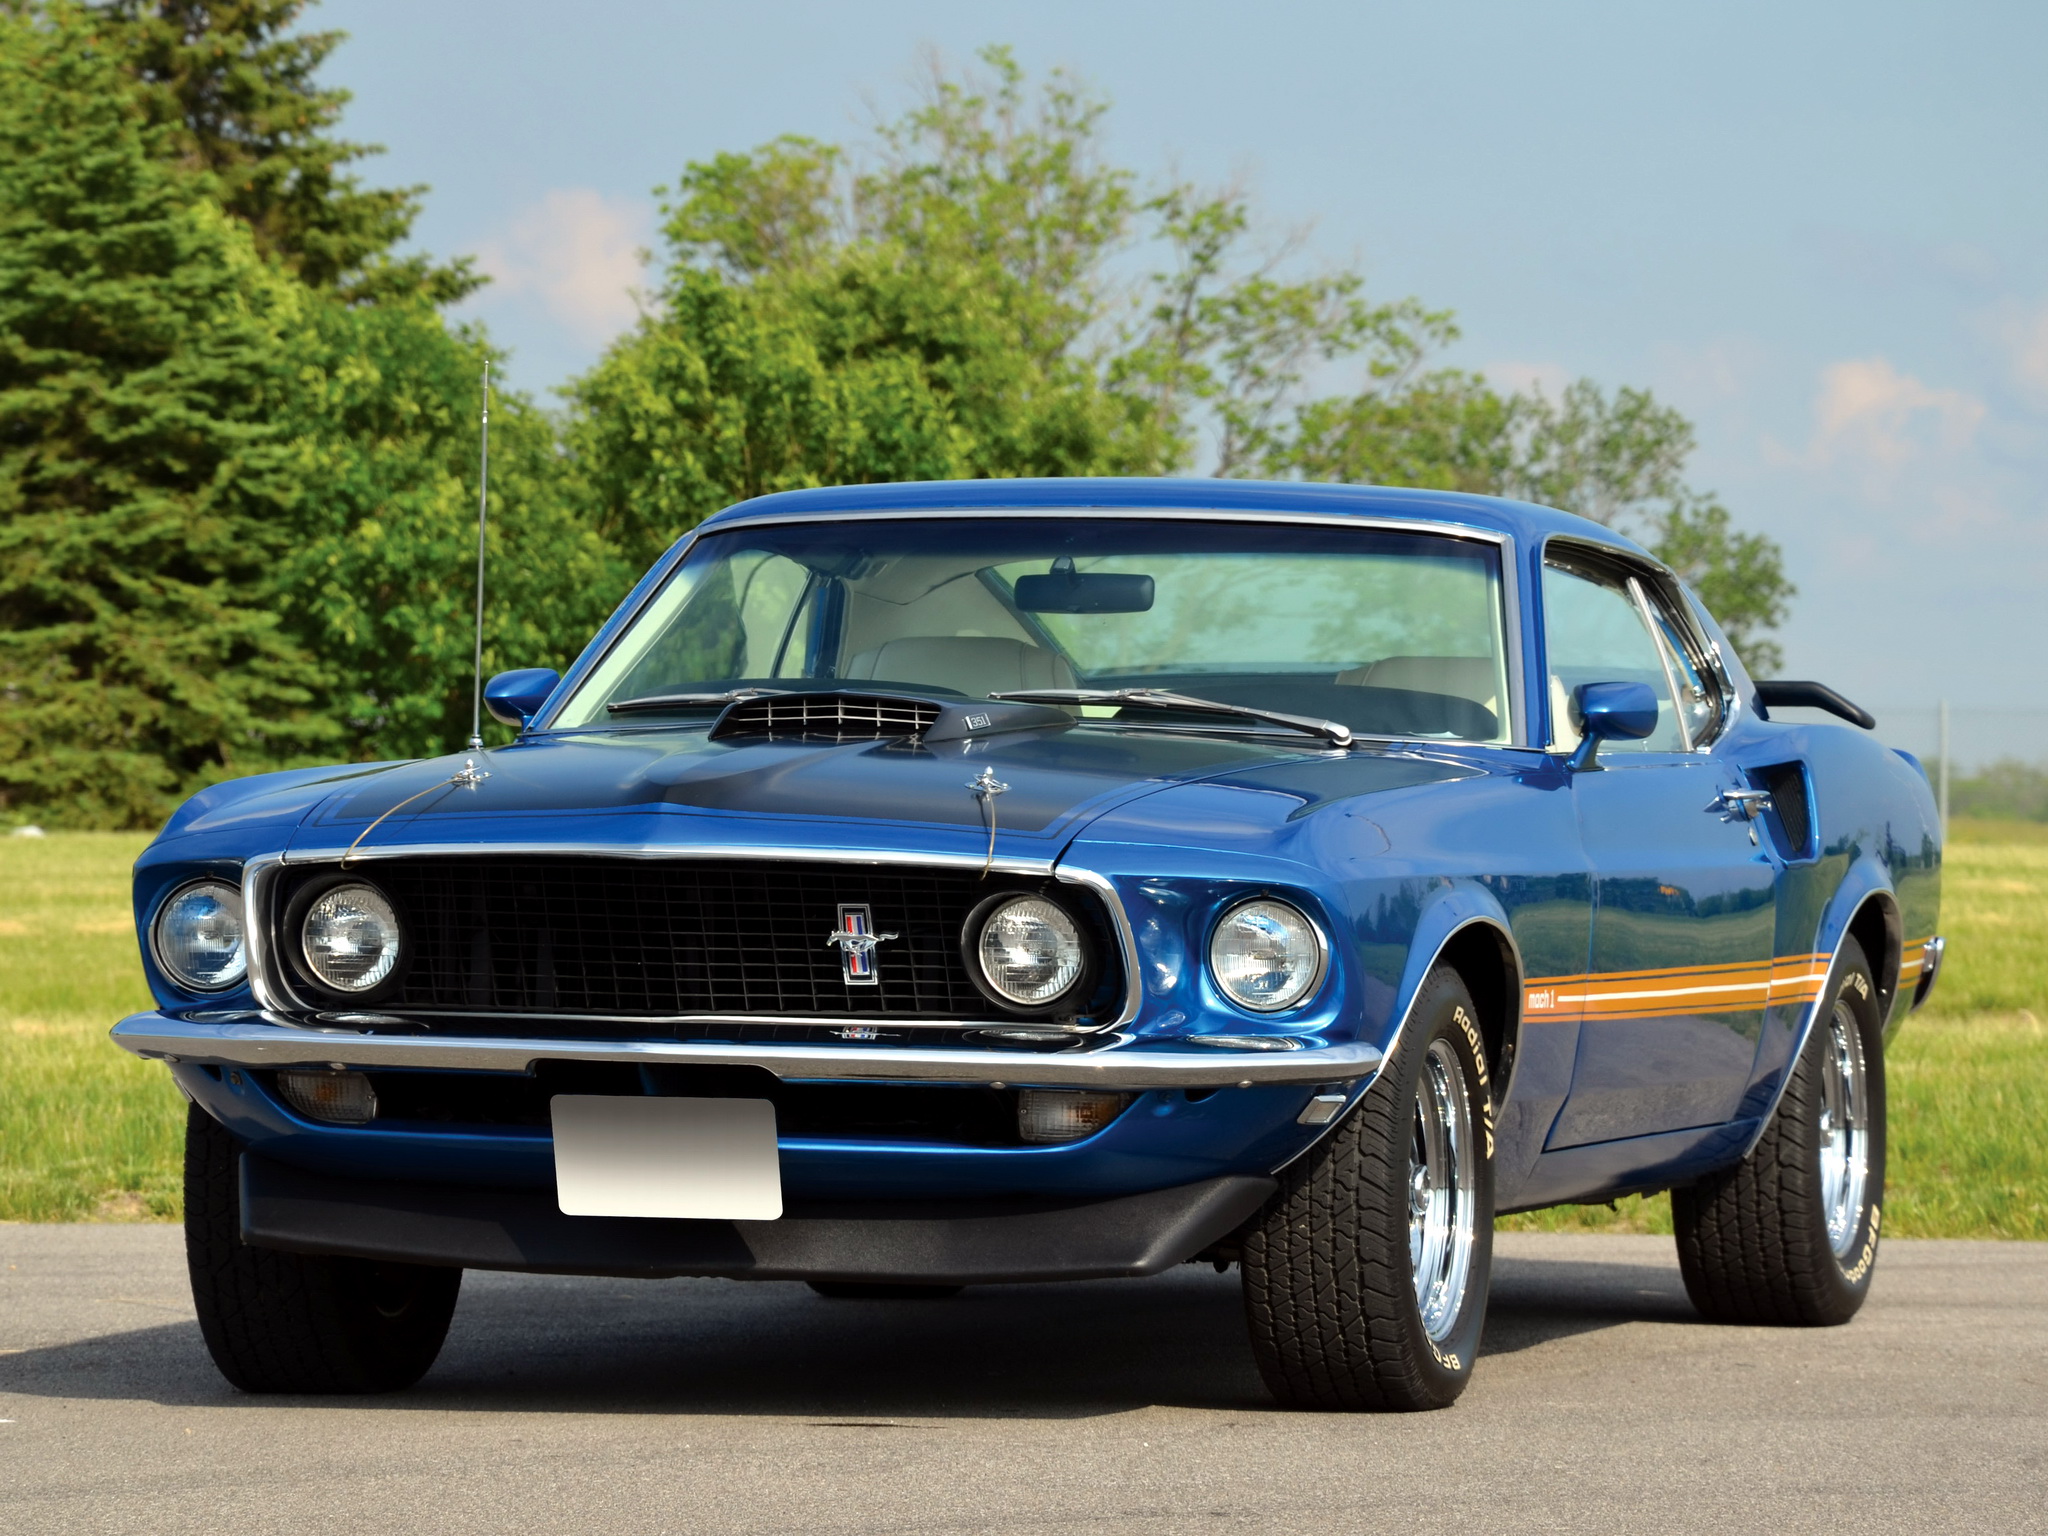 1969 Ford Mustang Mach 1 Hd Wallpaper Background Image 3264x2448 | Hot ...